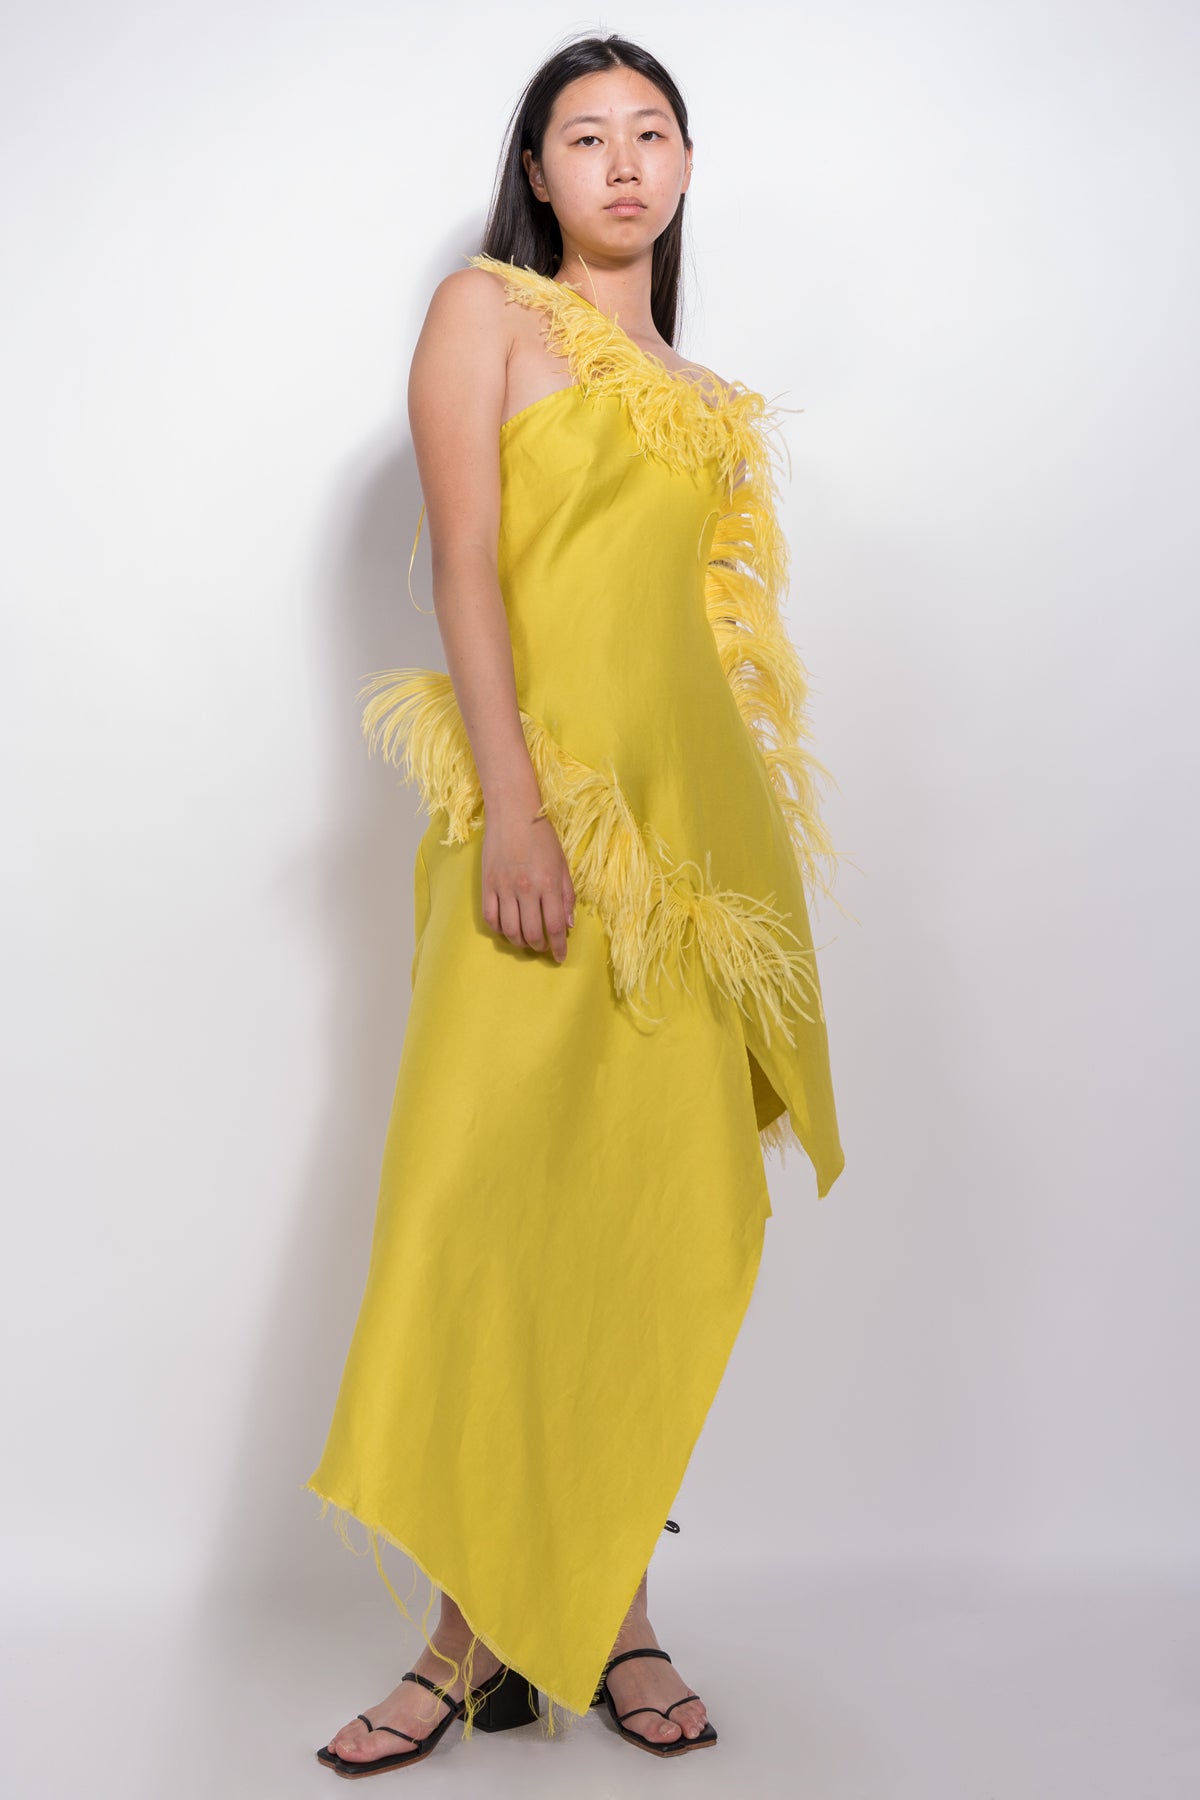 YELLOW ASYMMETRIC DRESS WITH FEATHERS